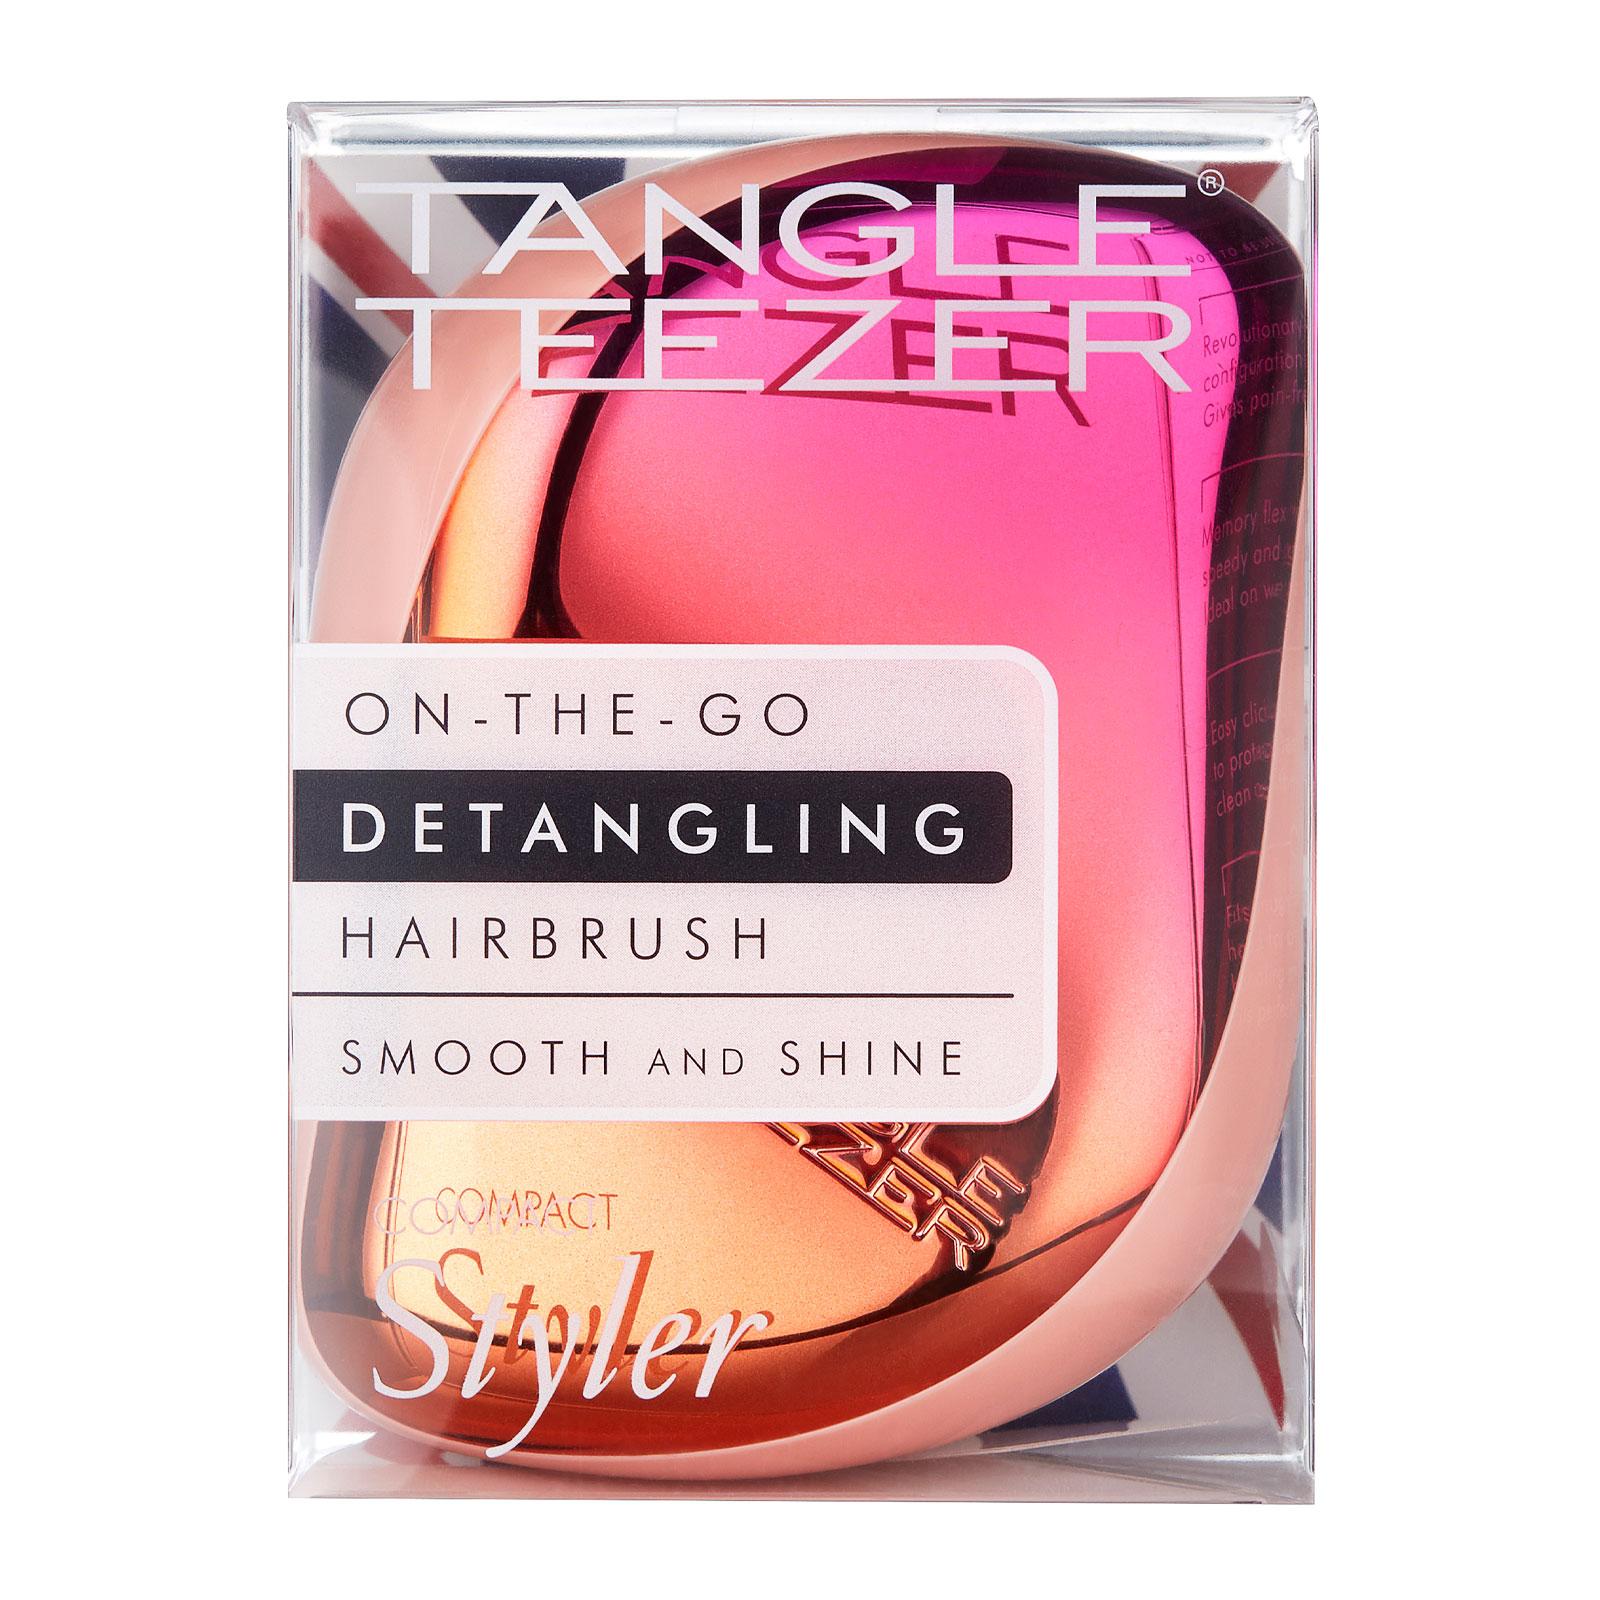 Tangle Teezer Compact Styler Hairbrush - Cerise Pink Ombre - Feelunique